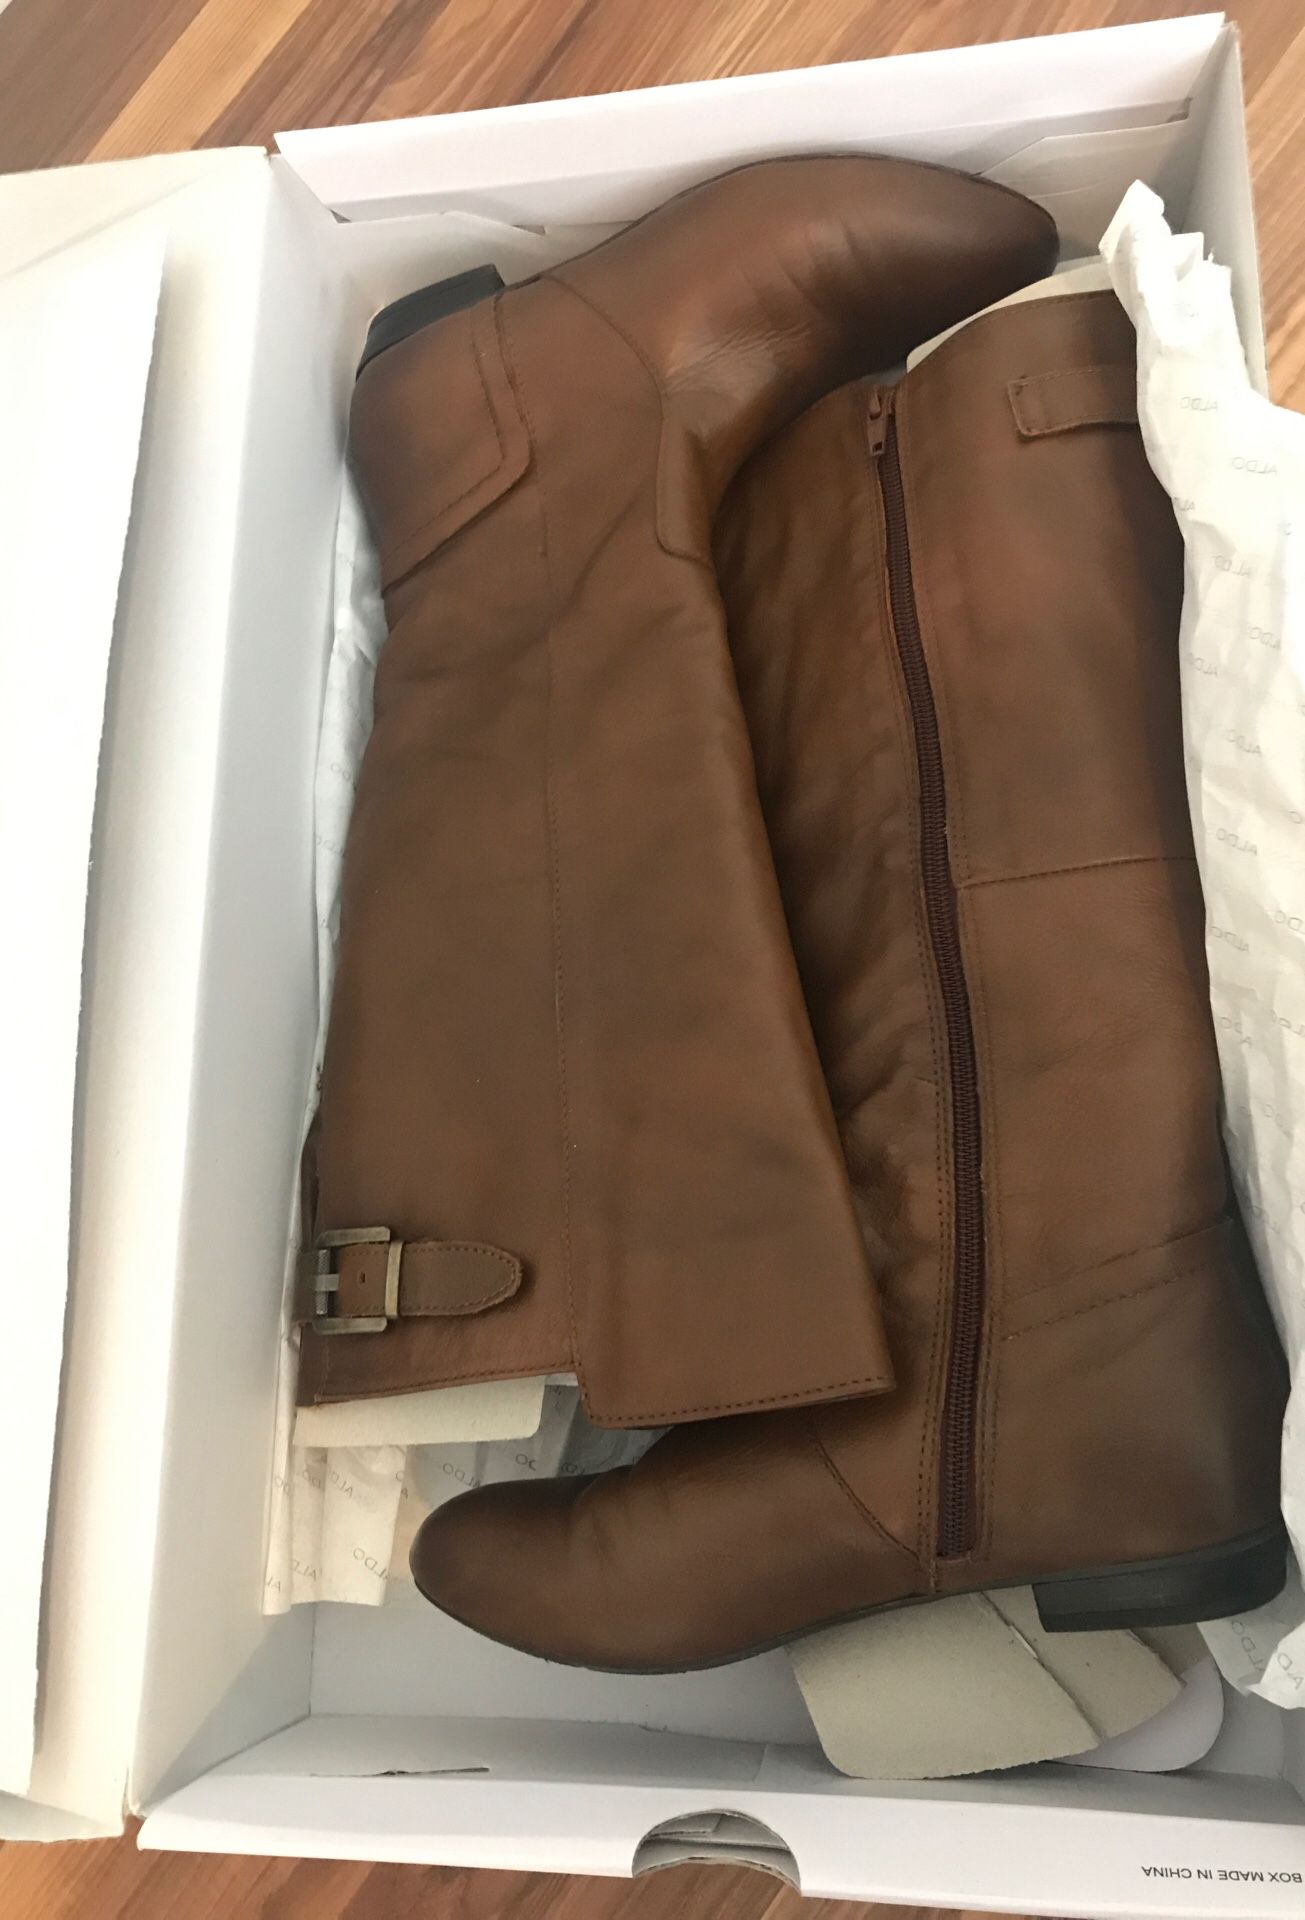 Size 6 brown boots from Aldos